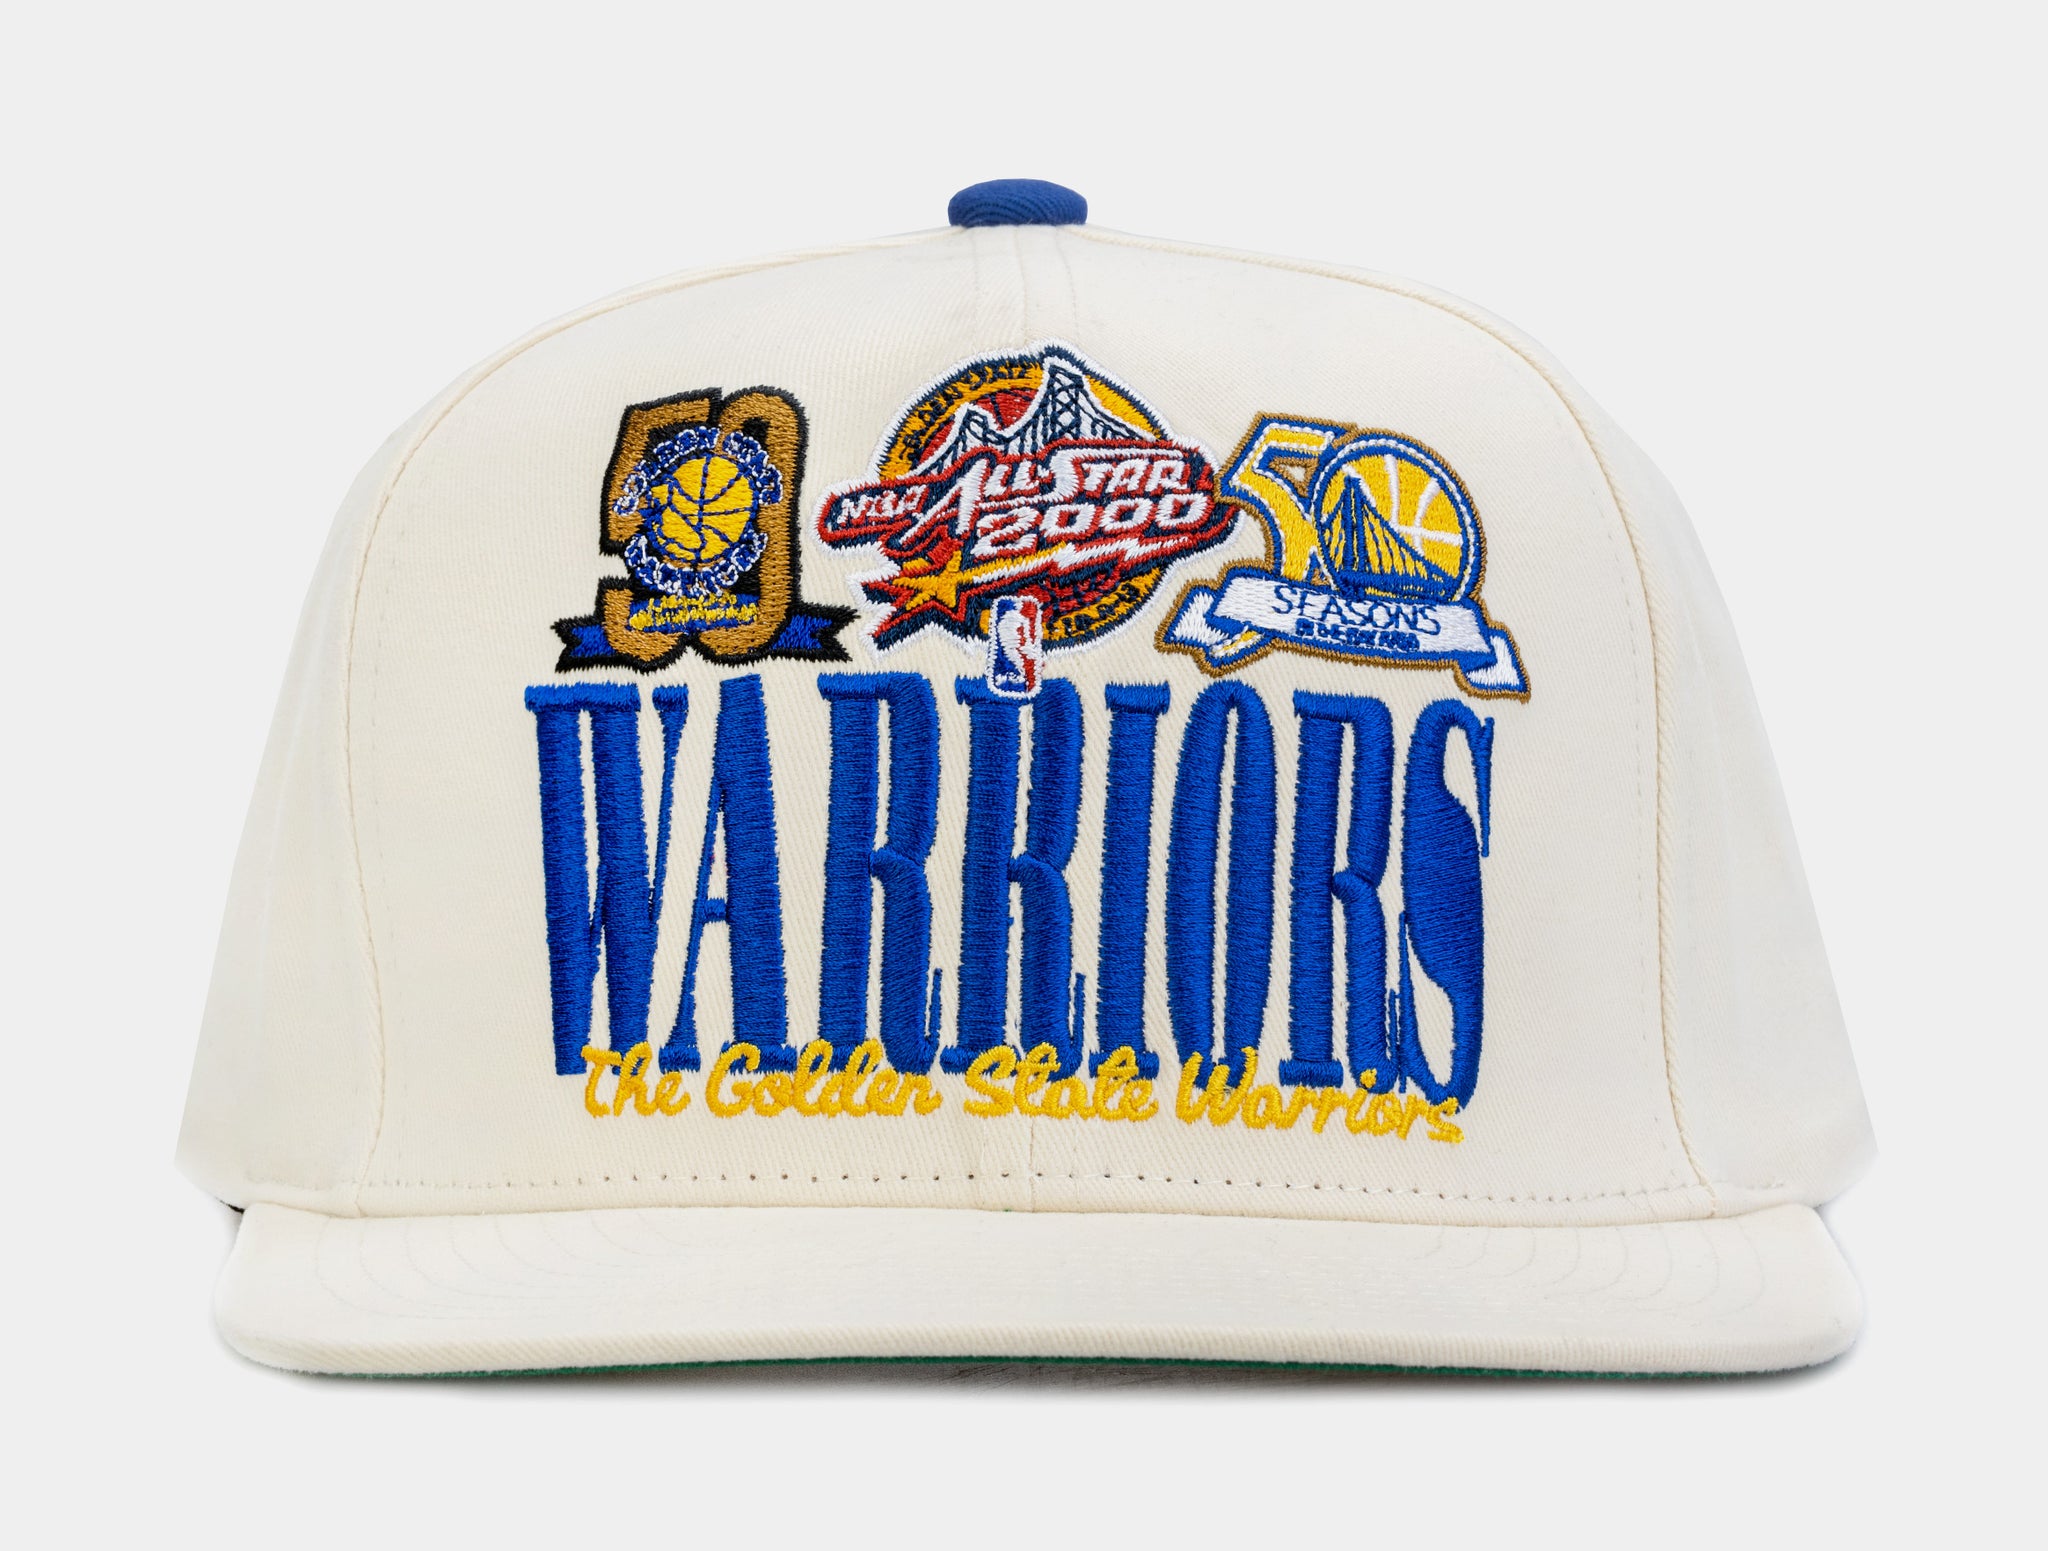 Mitchell & Ness Nba Golden State Warriors Classic Snapback Cap in